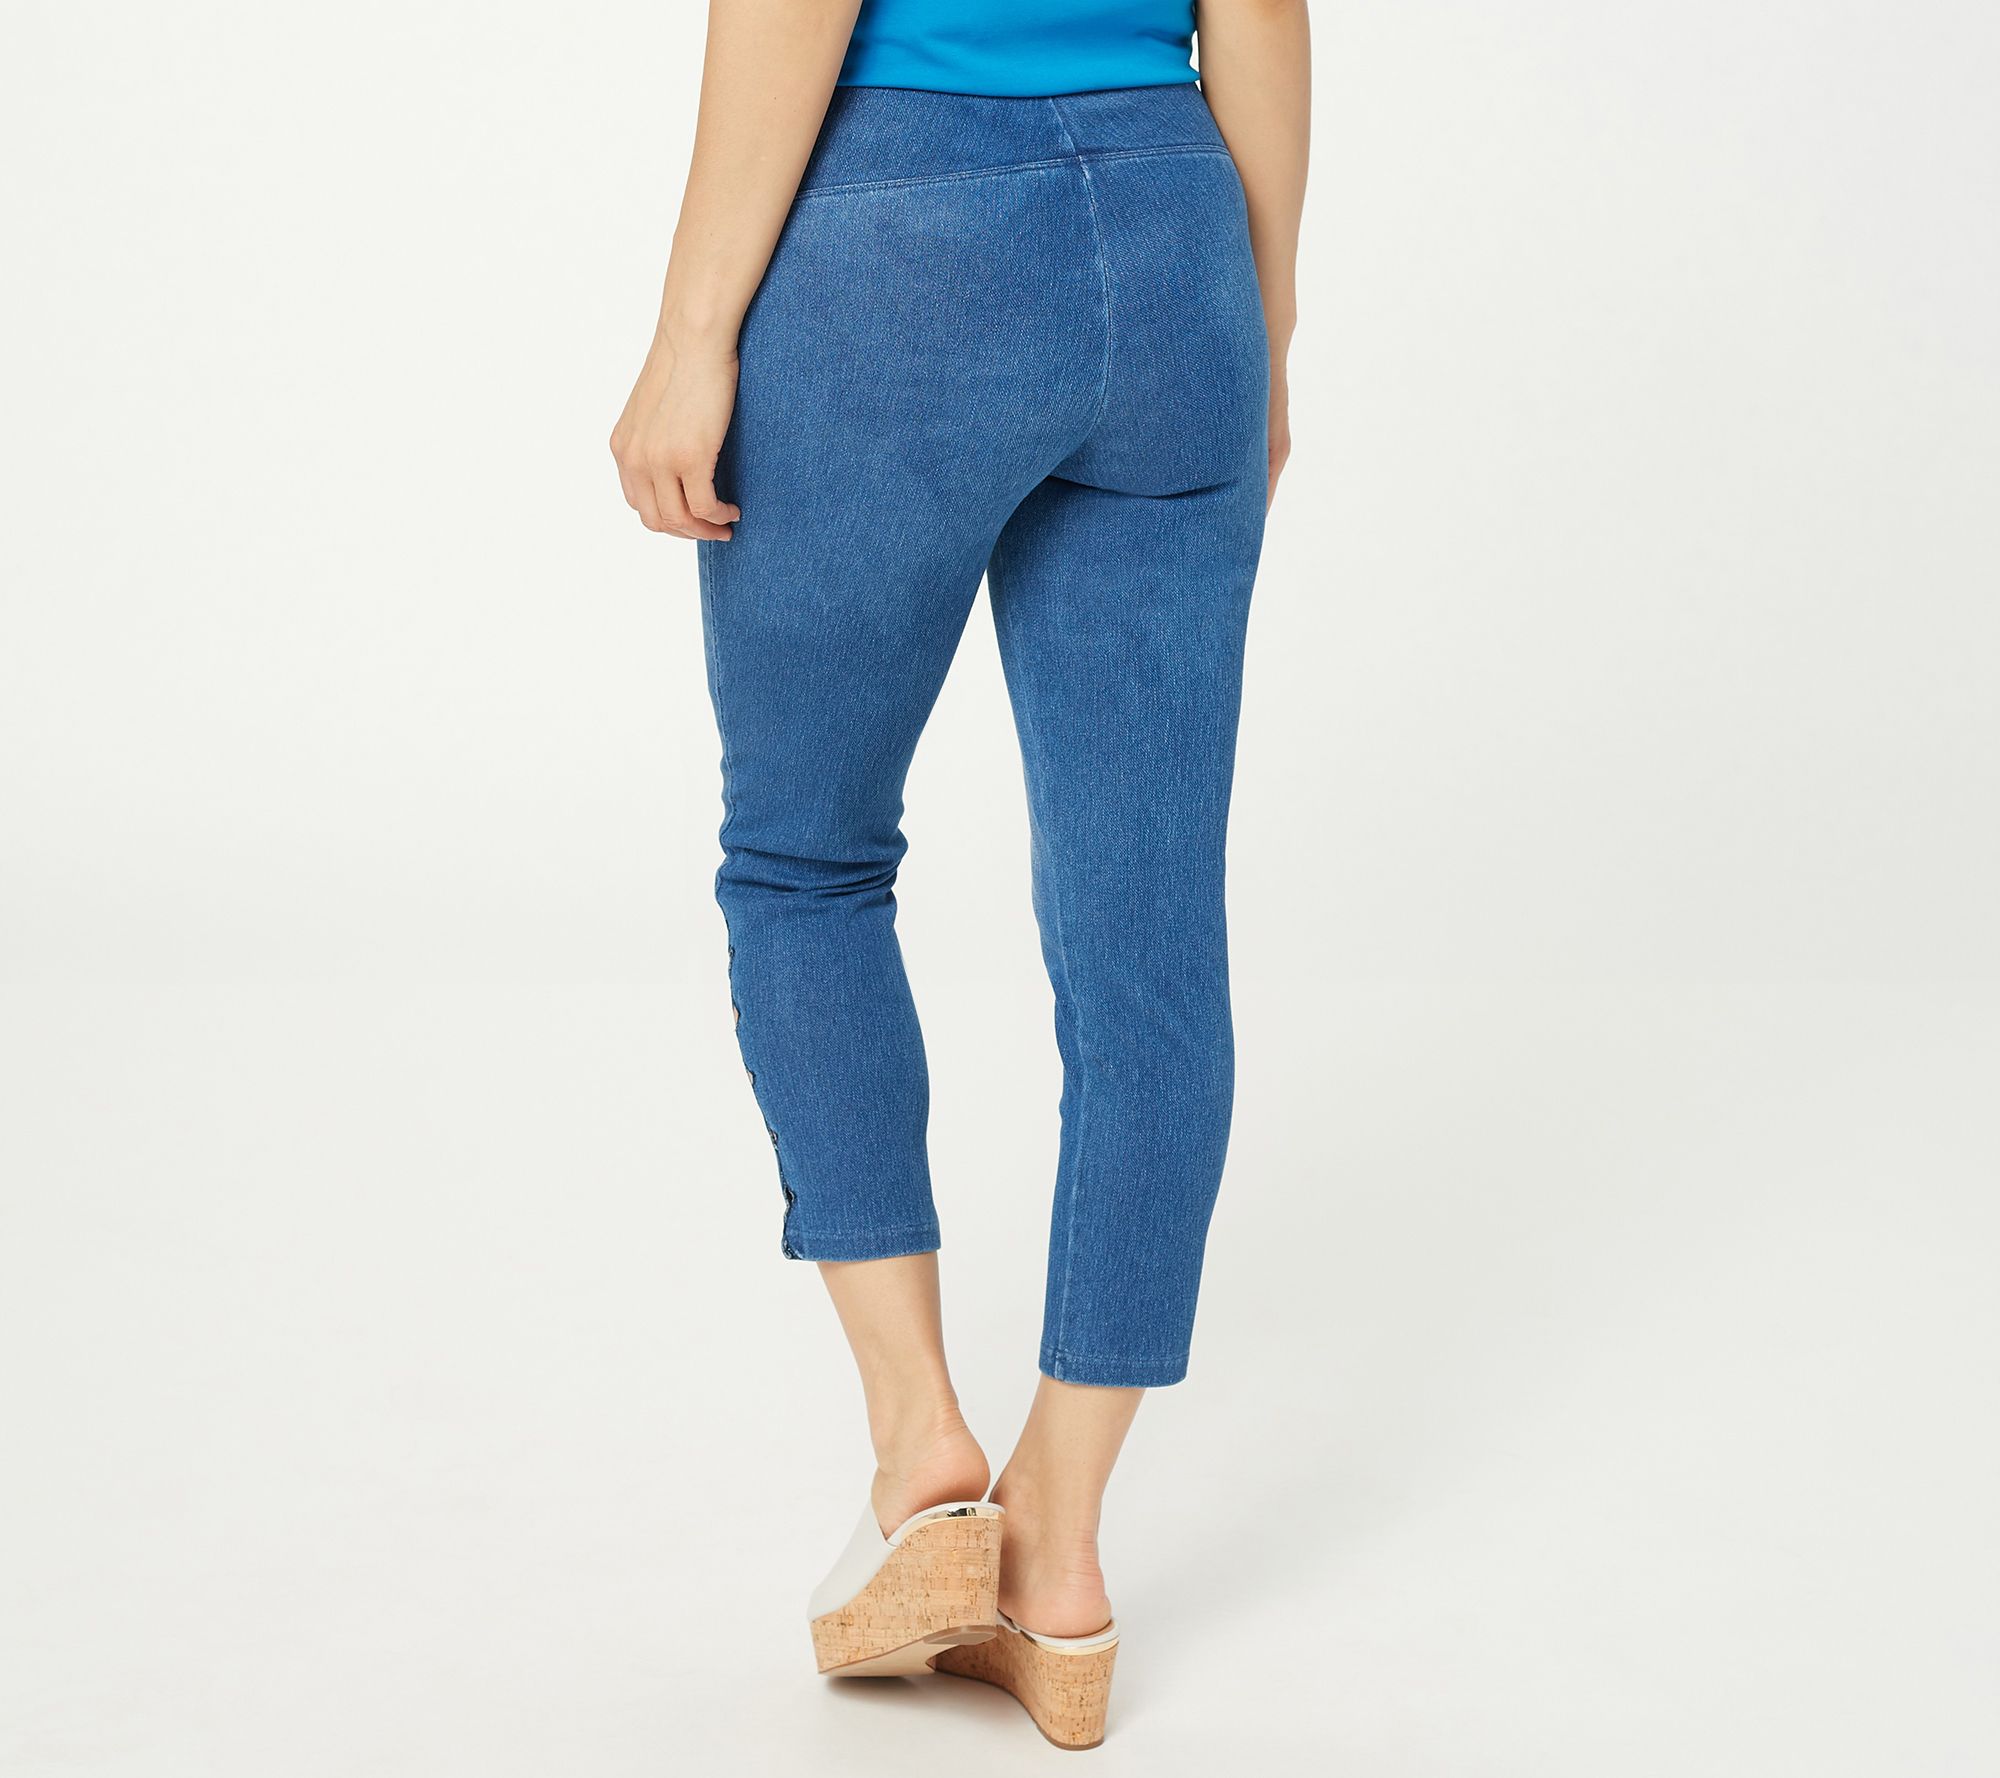 Women with Control Tall Prime Stretch Crop Denim Pants 